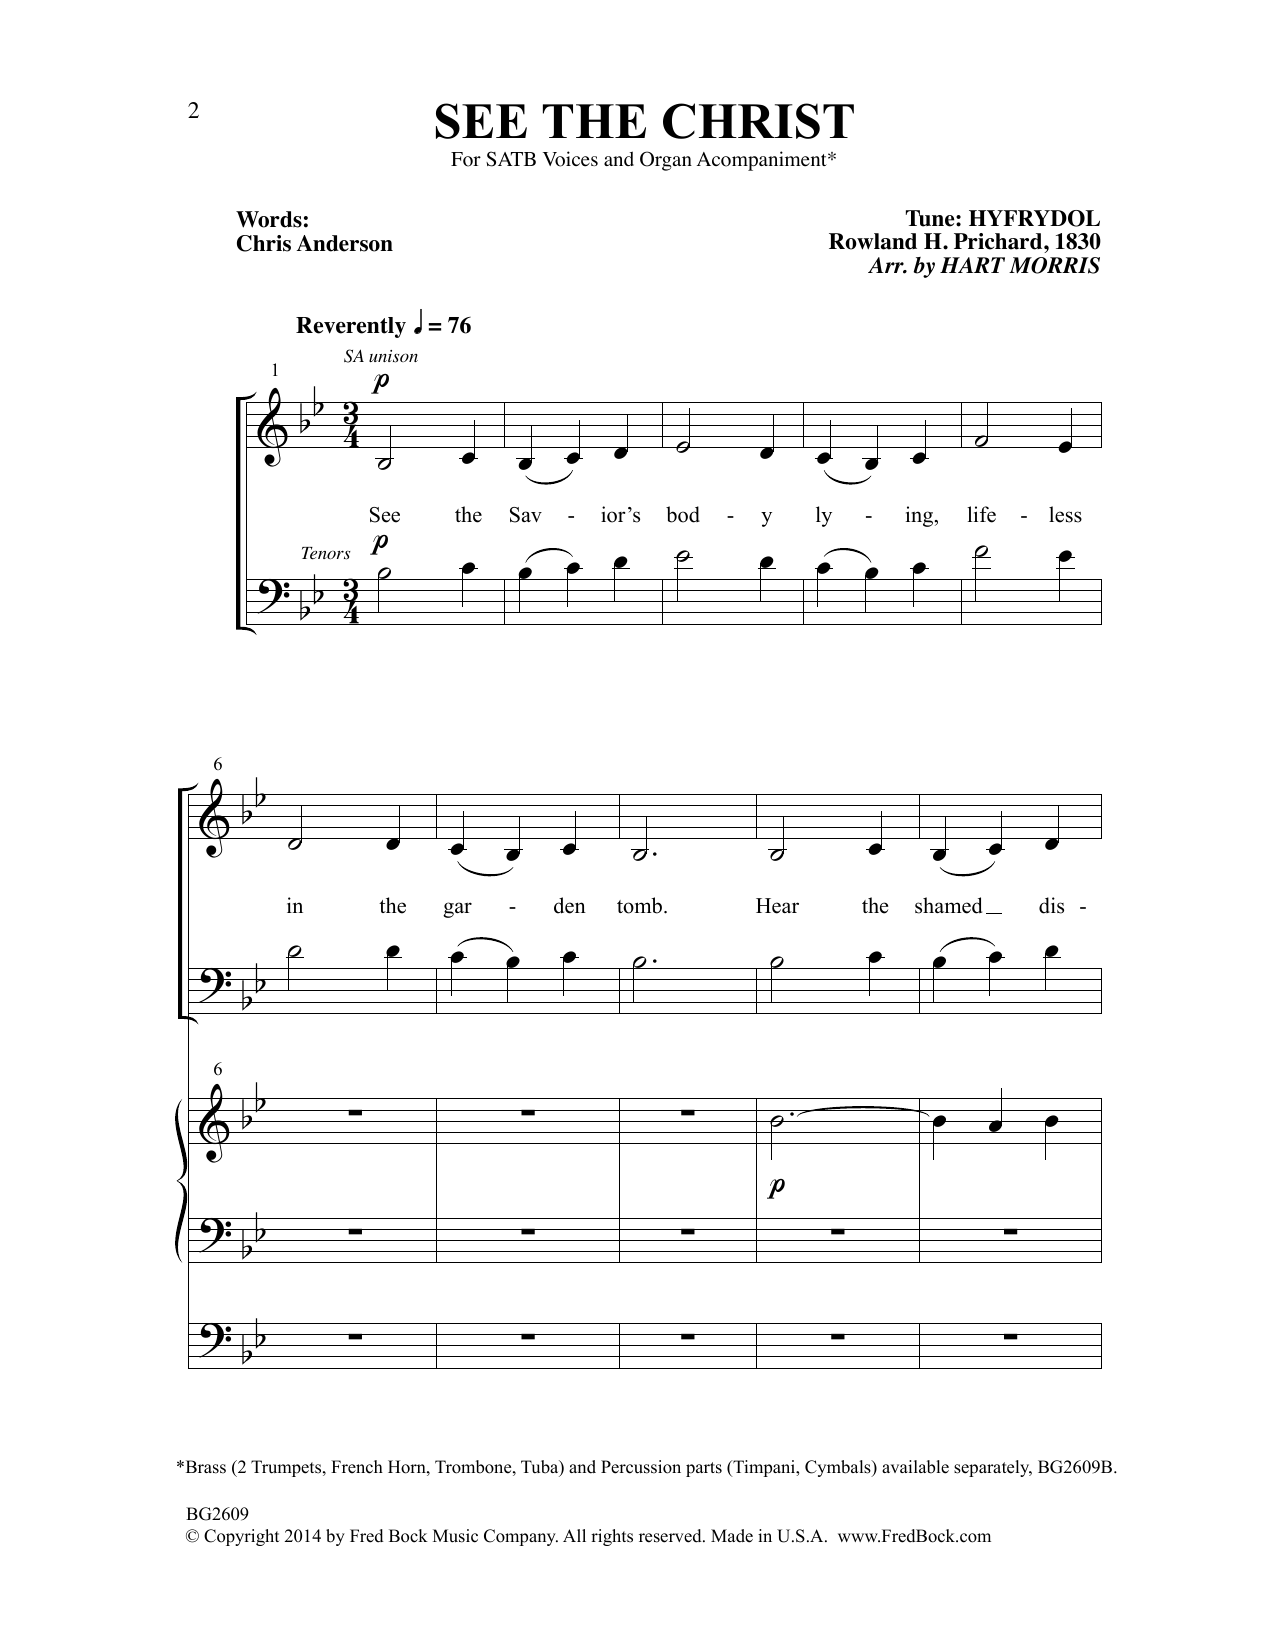 Download Rowland H. Prichard See The Christ (arr. Hart Morris) Sheet Music